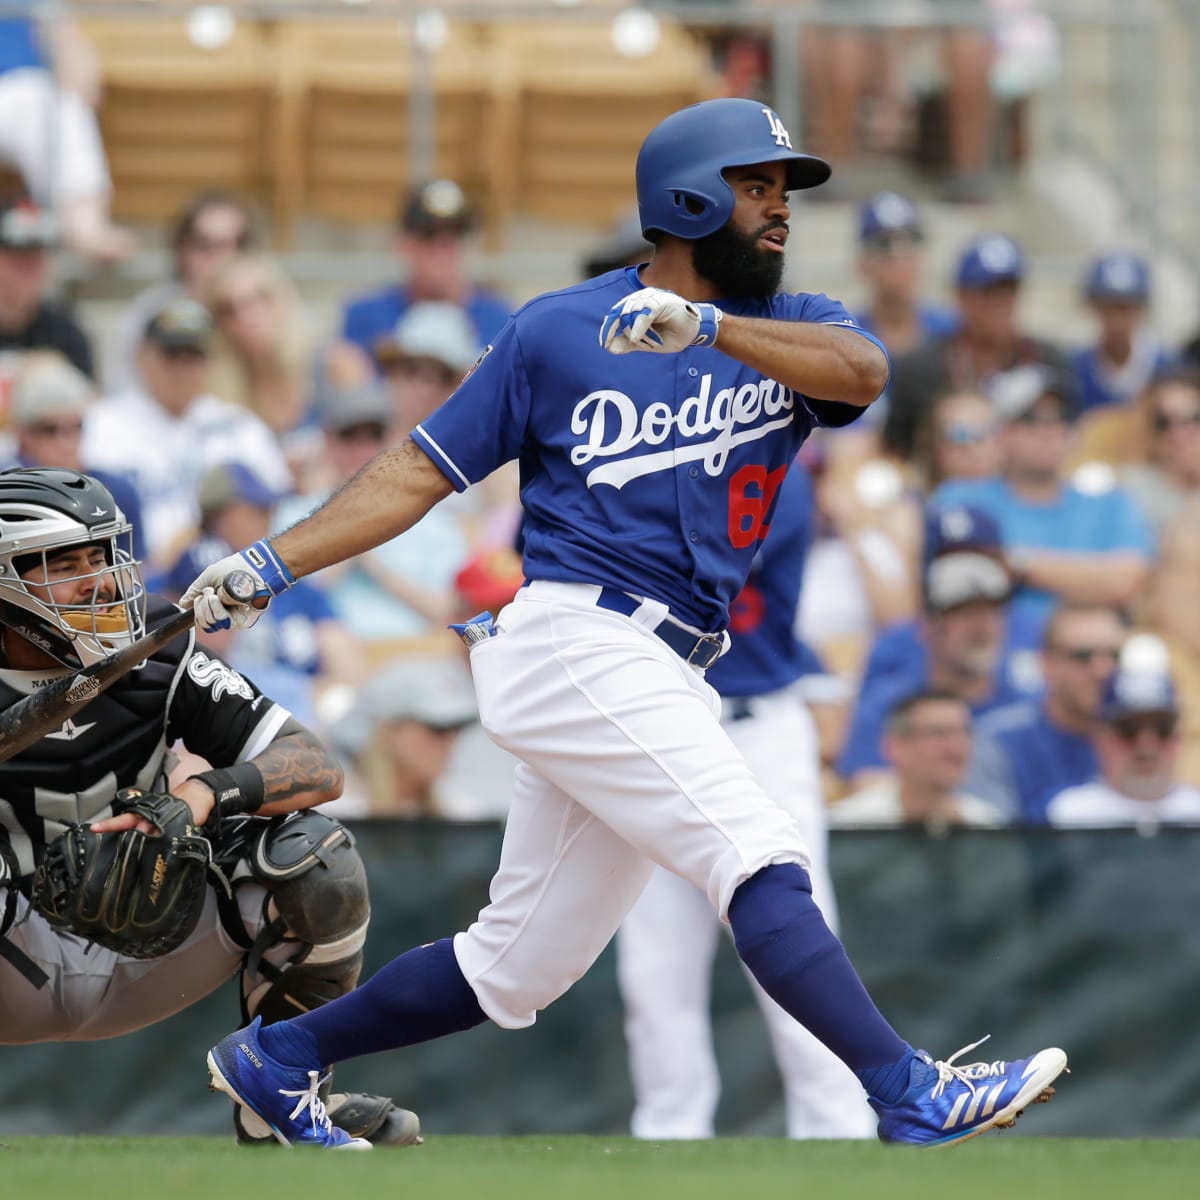 Dodgers Re-Signed Former OF Andrew Toles for a Noble Reason